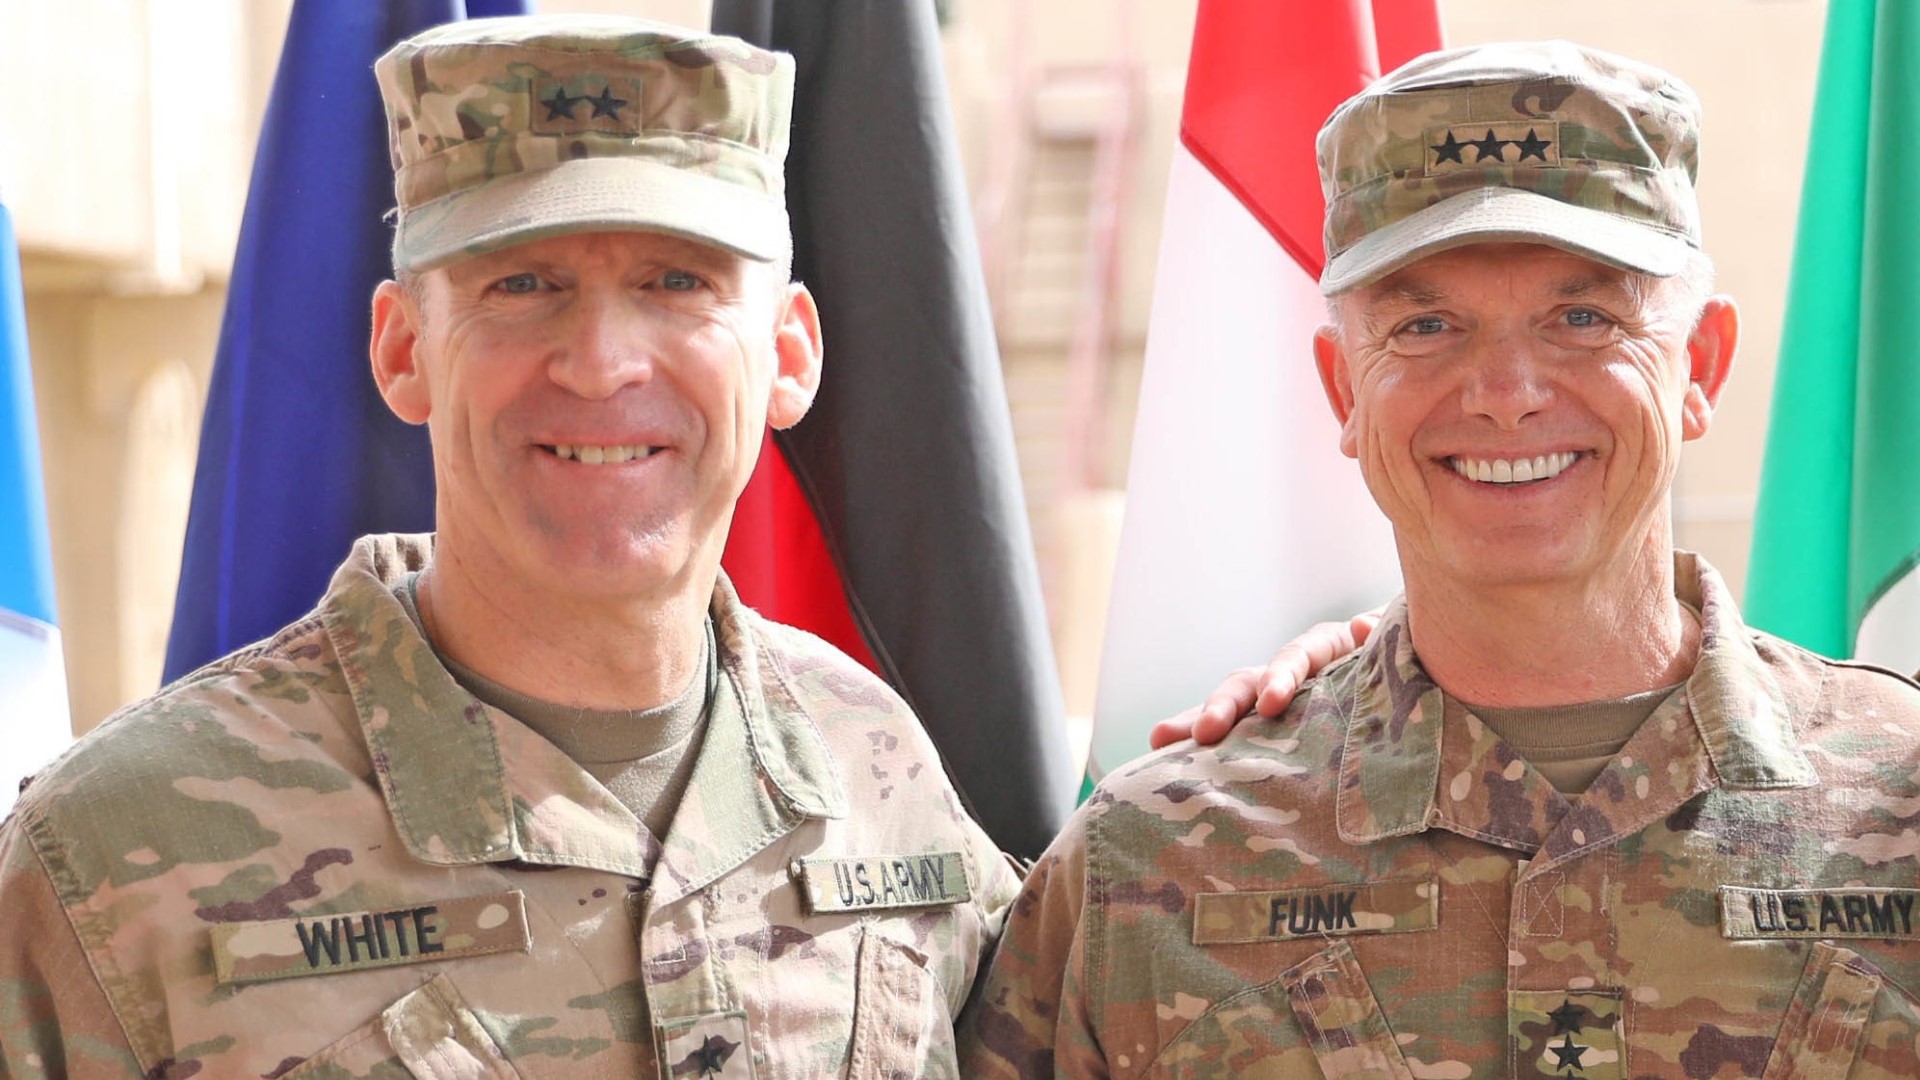 Lt. Gen. Pat White was sworn in to take command of III Corps at Fort Hood Wednesday.